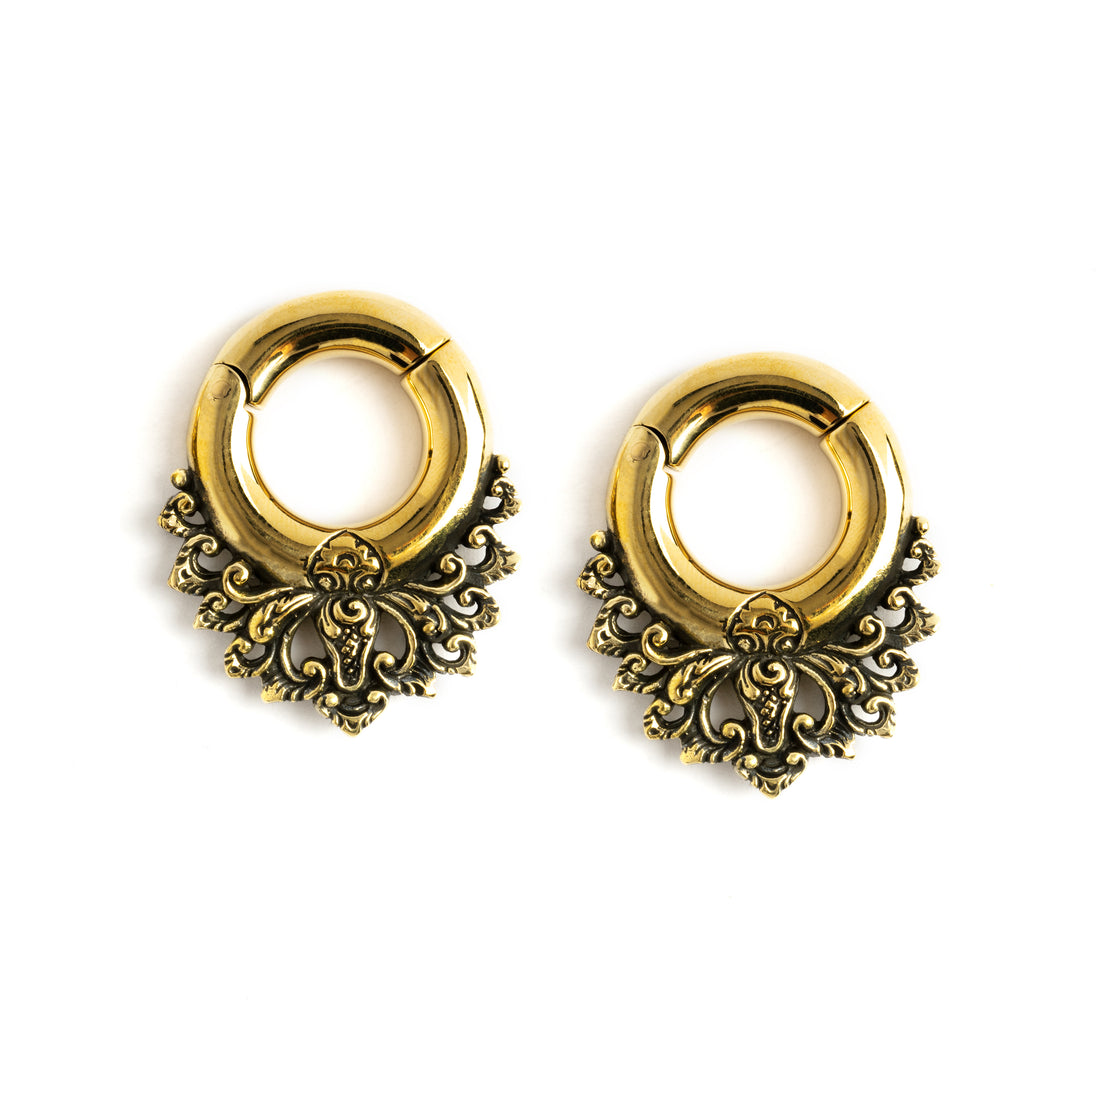 pair of gold brass ear hangers hoops with floral victorian design frontal view